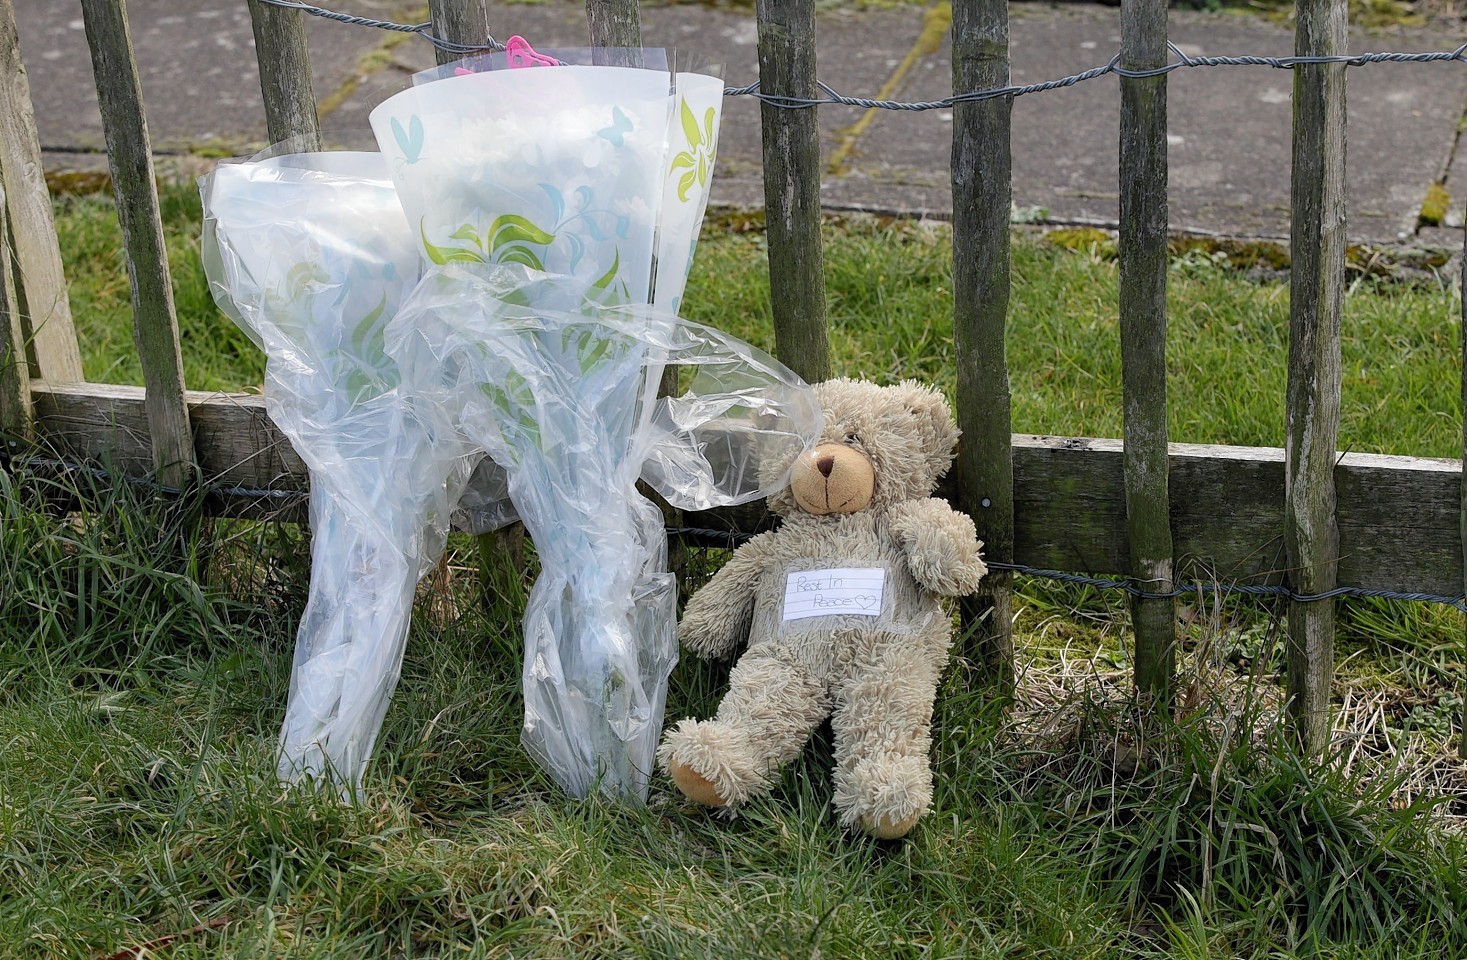 Tributes have been left outside the family home where young Chloe Sutherland was found dead